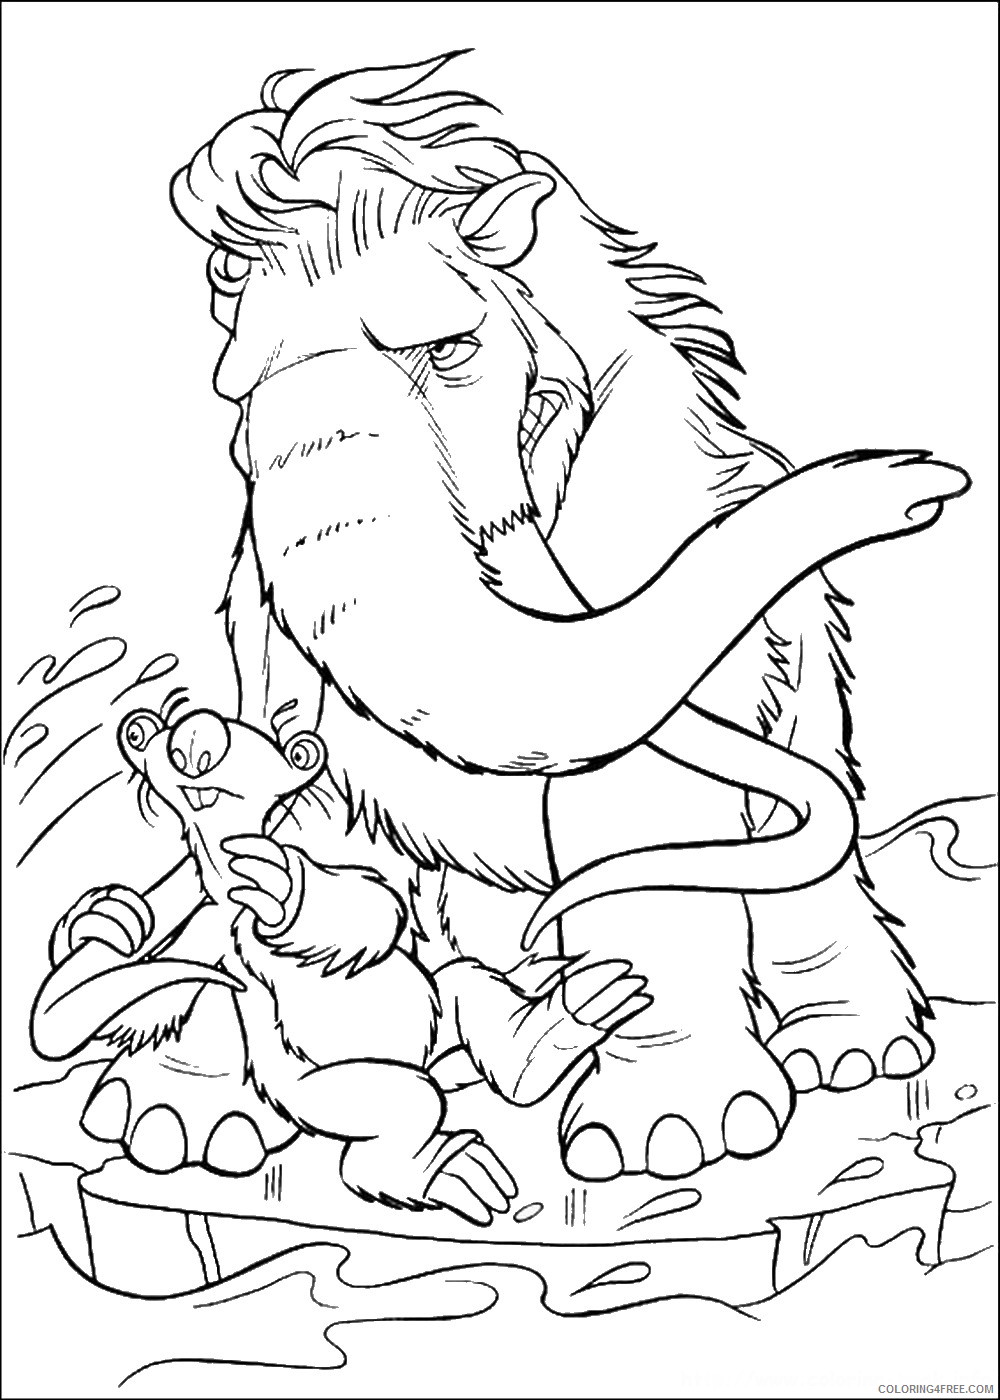 Ice Age Coloring Pages Cartoons ice age 03 Printable 2020 3374 Coloring4free